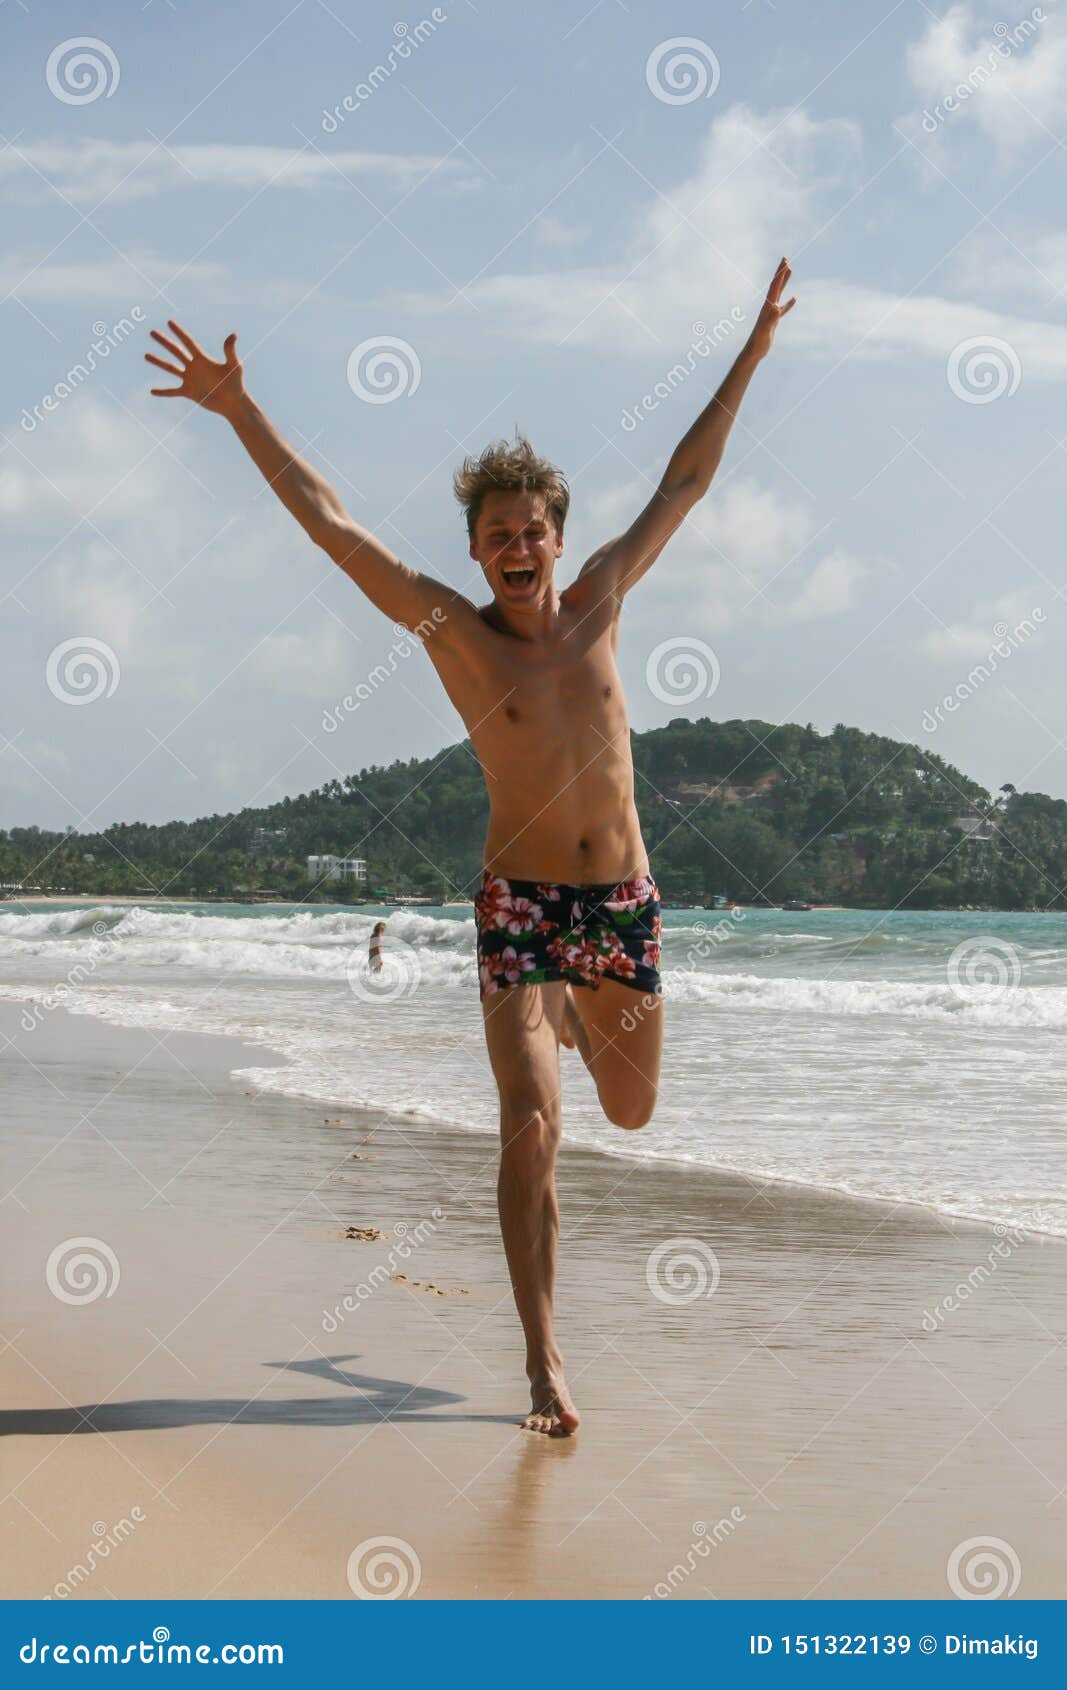 European Tourist Wearing Red Swimming Underwear Running and Jumping on the  Beach. Stock Image - Image of outdoor, person: 151322139